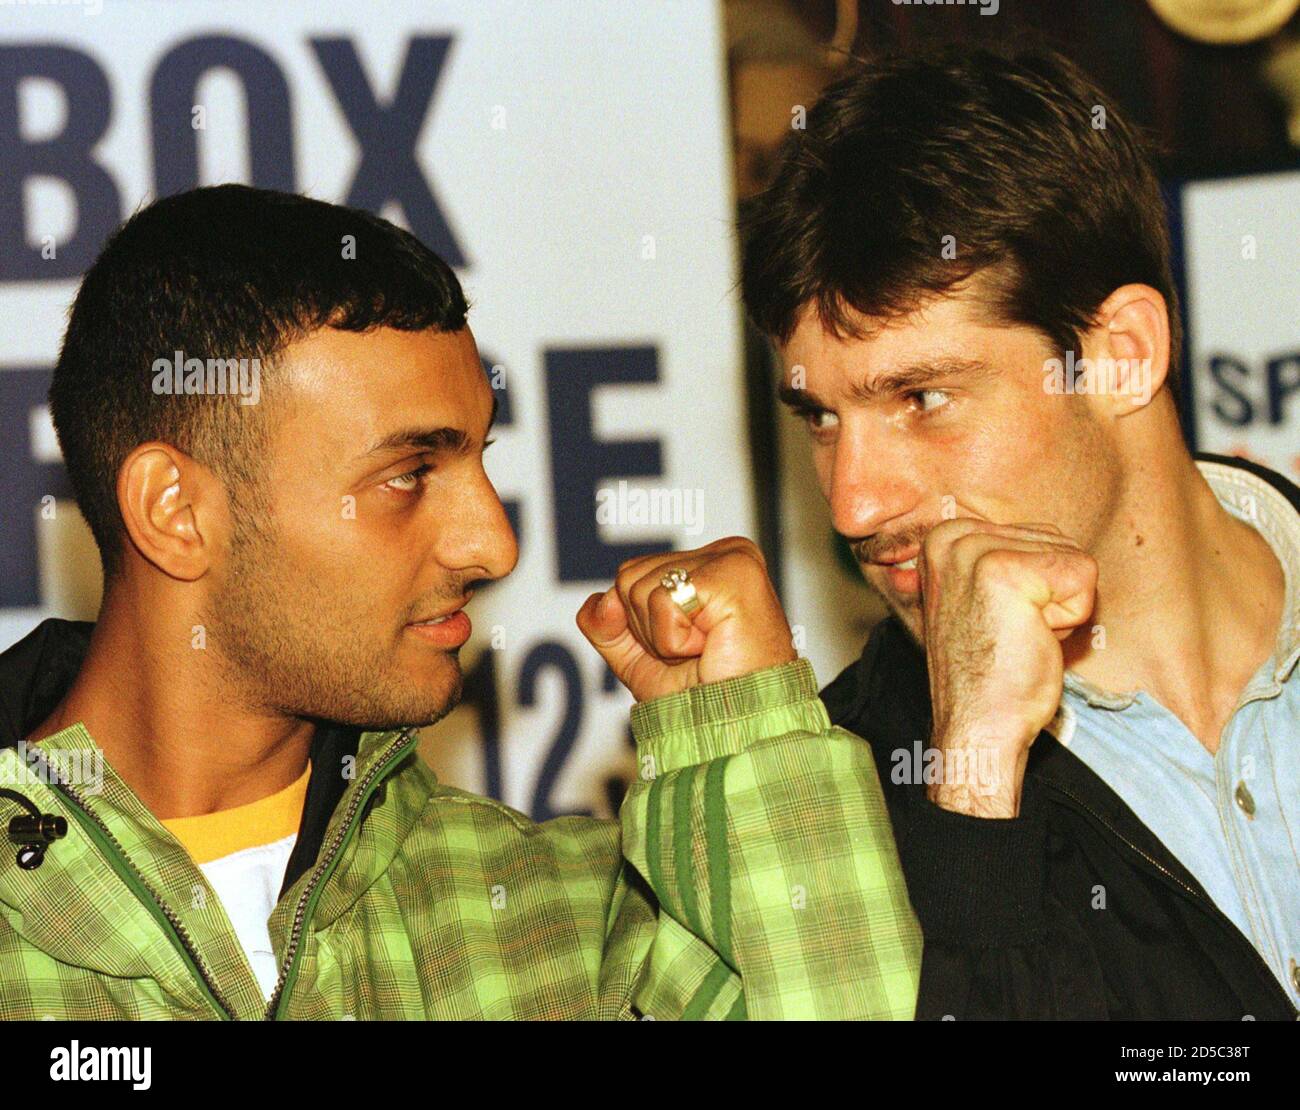 Prince Naseem Hamed (L) squares up to his next opponent, Argentinian Juan  Cabrera at a pre fight news conference, July 17. Hamed, the current World  Boxing Organisation featherweight champion, predicted that he